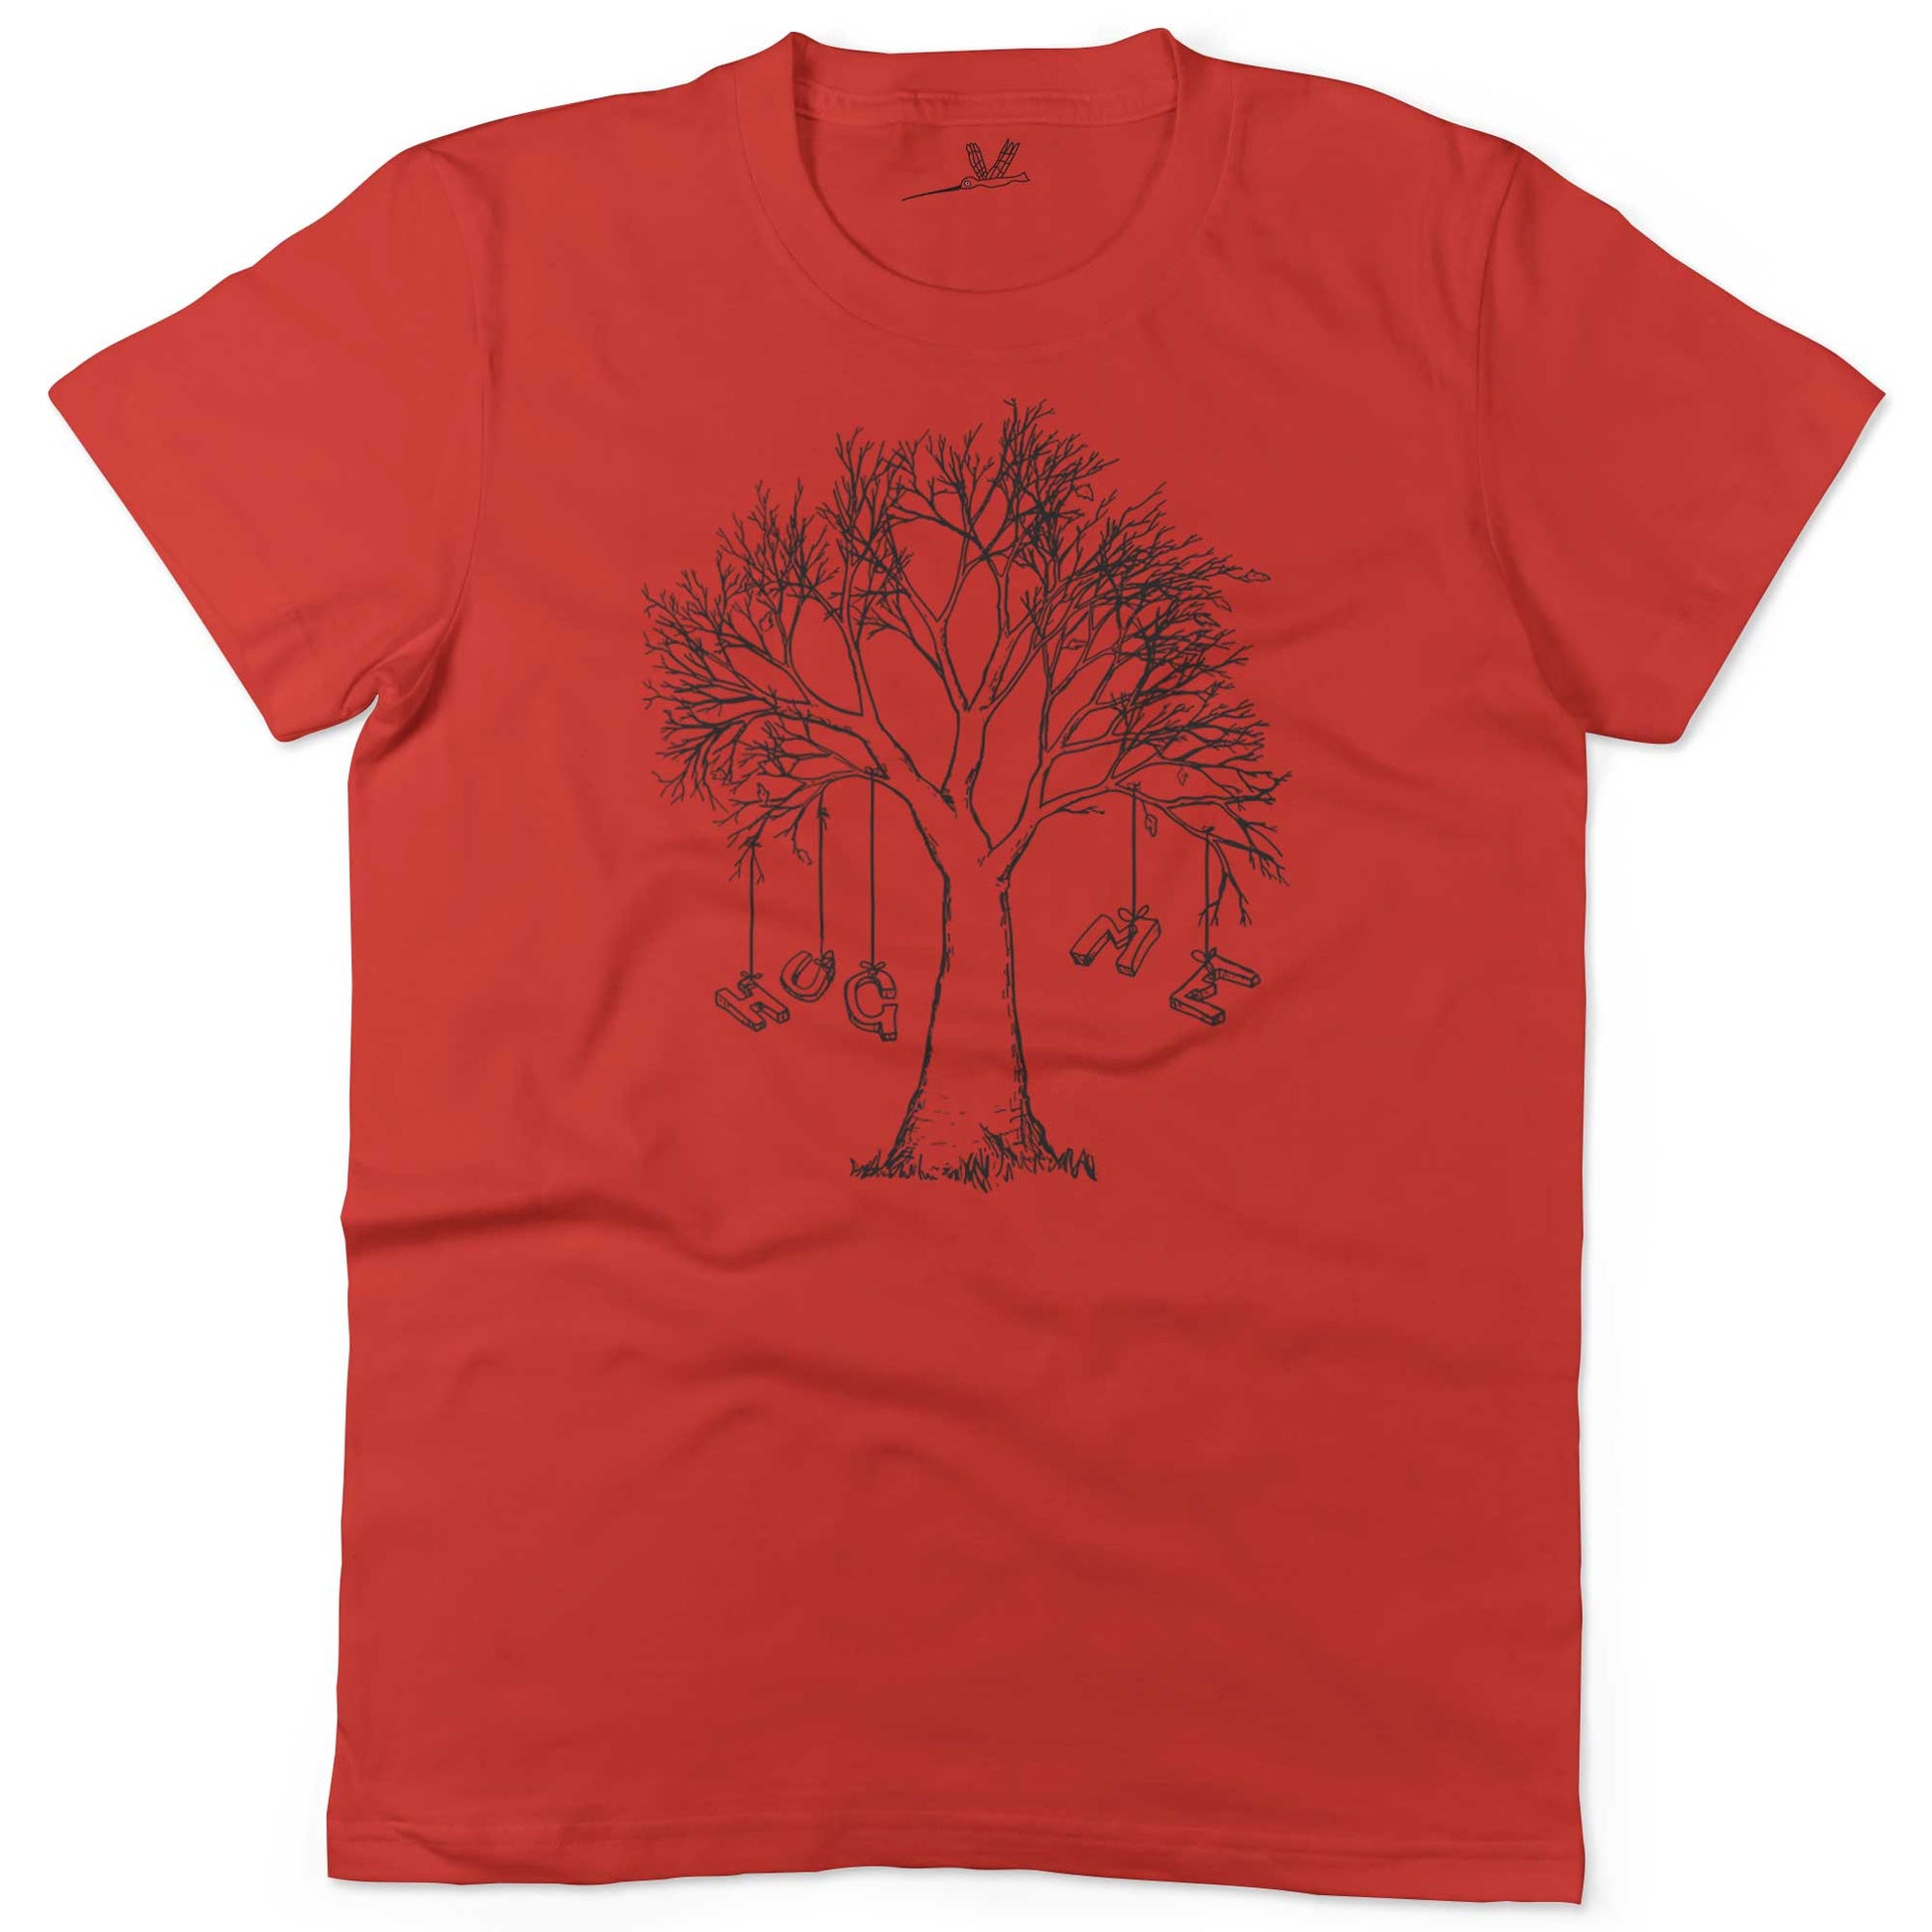 Hug A Tree Unisex Or Women's Cotton T-shirt-Red-Woman